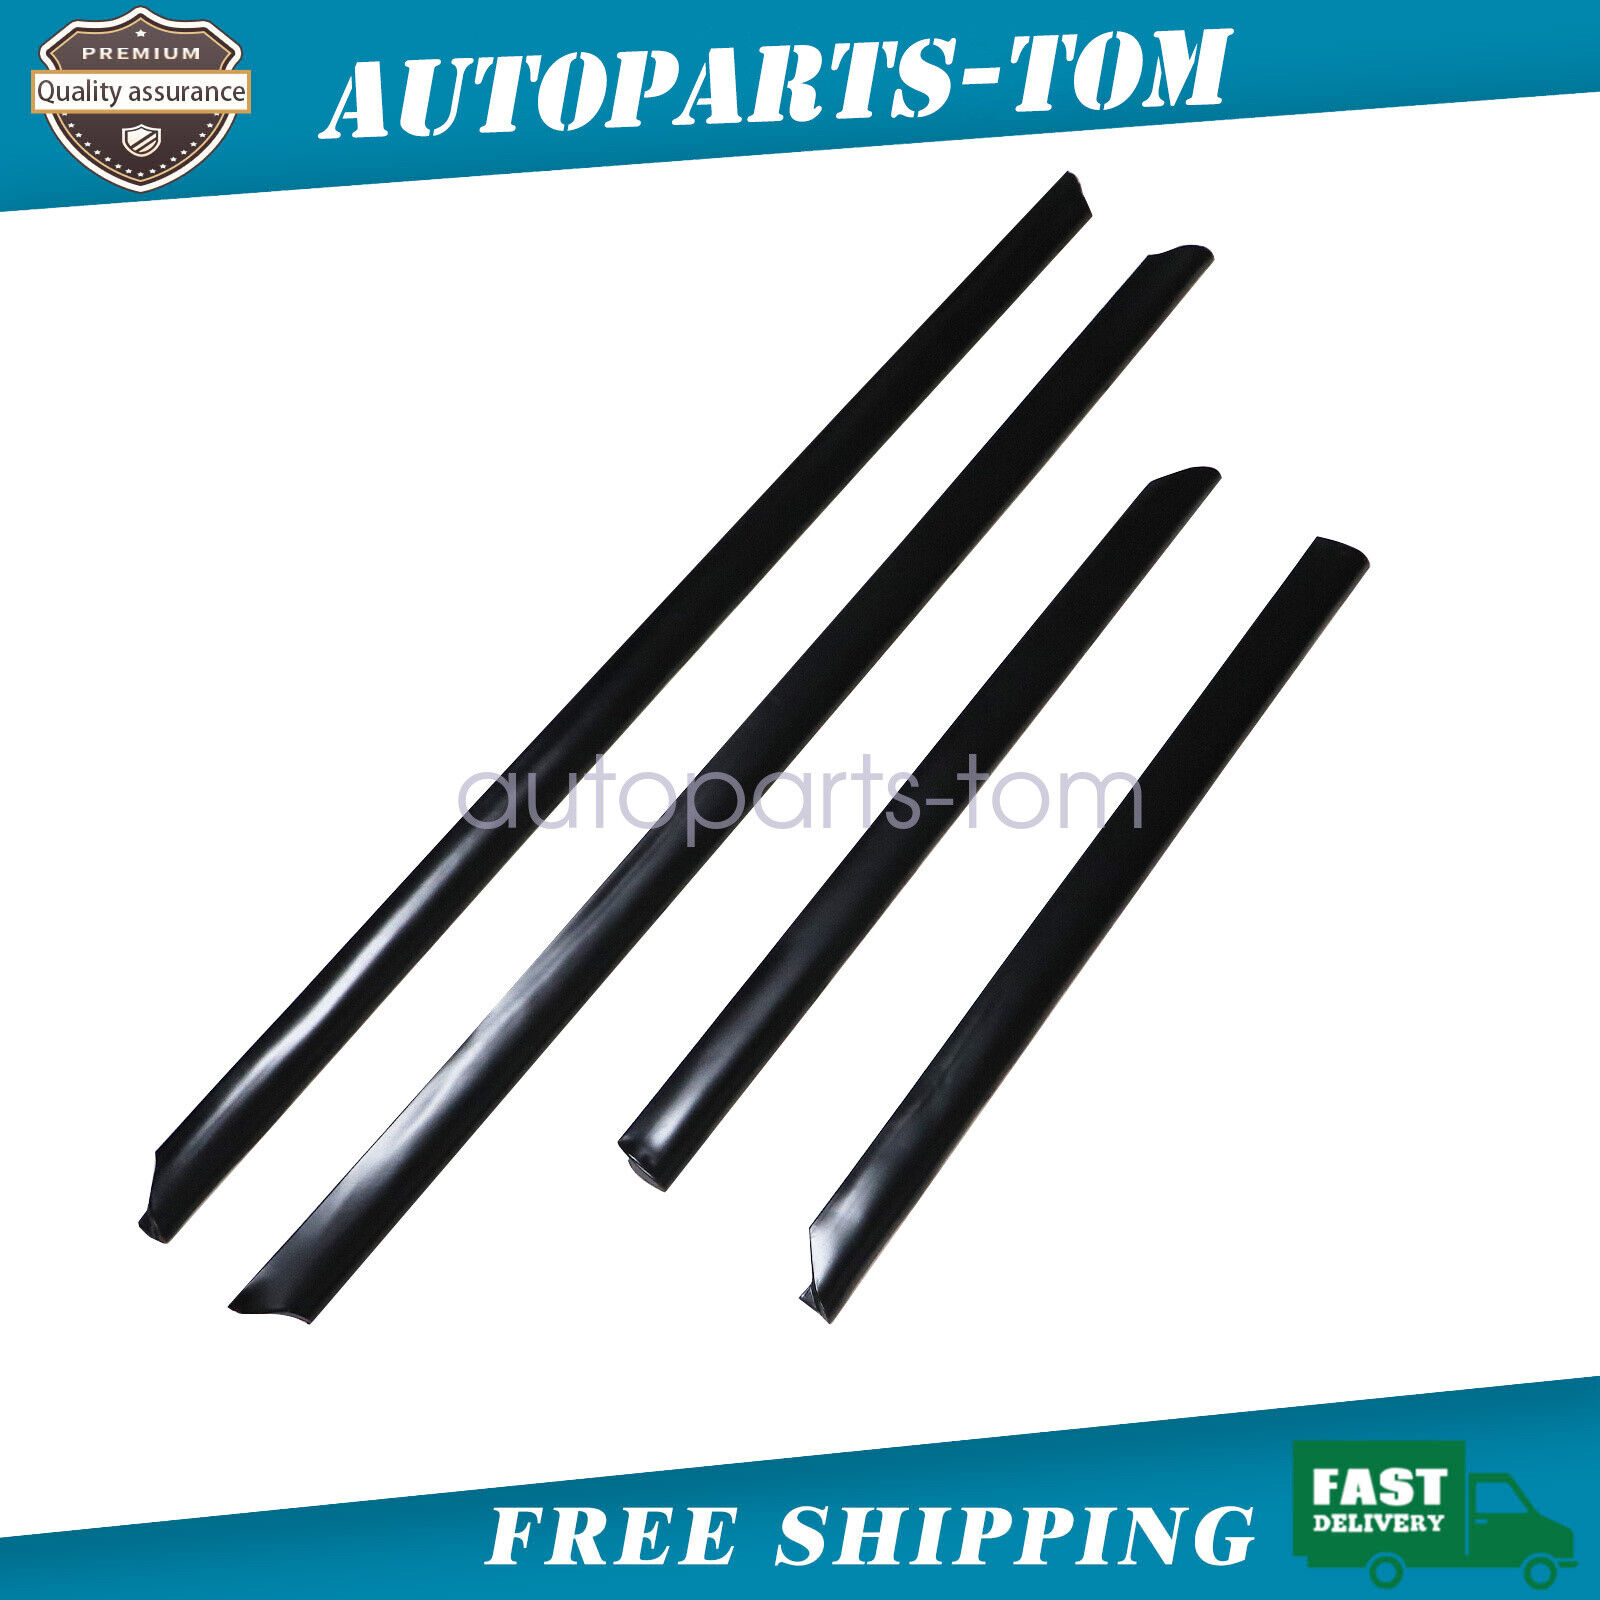 For AUDI A4 1996-2001 Lower Side Door Molding Trim Cover Set of 4